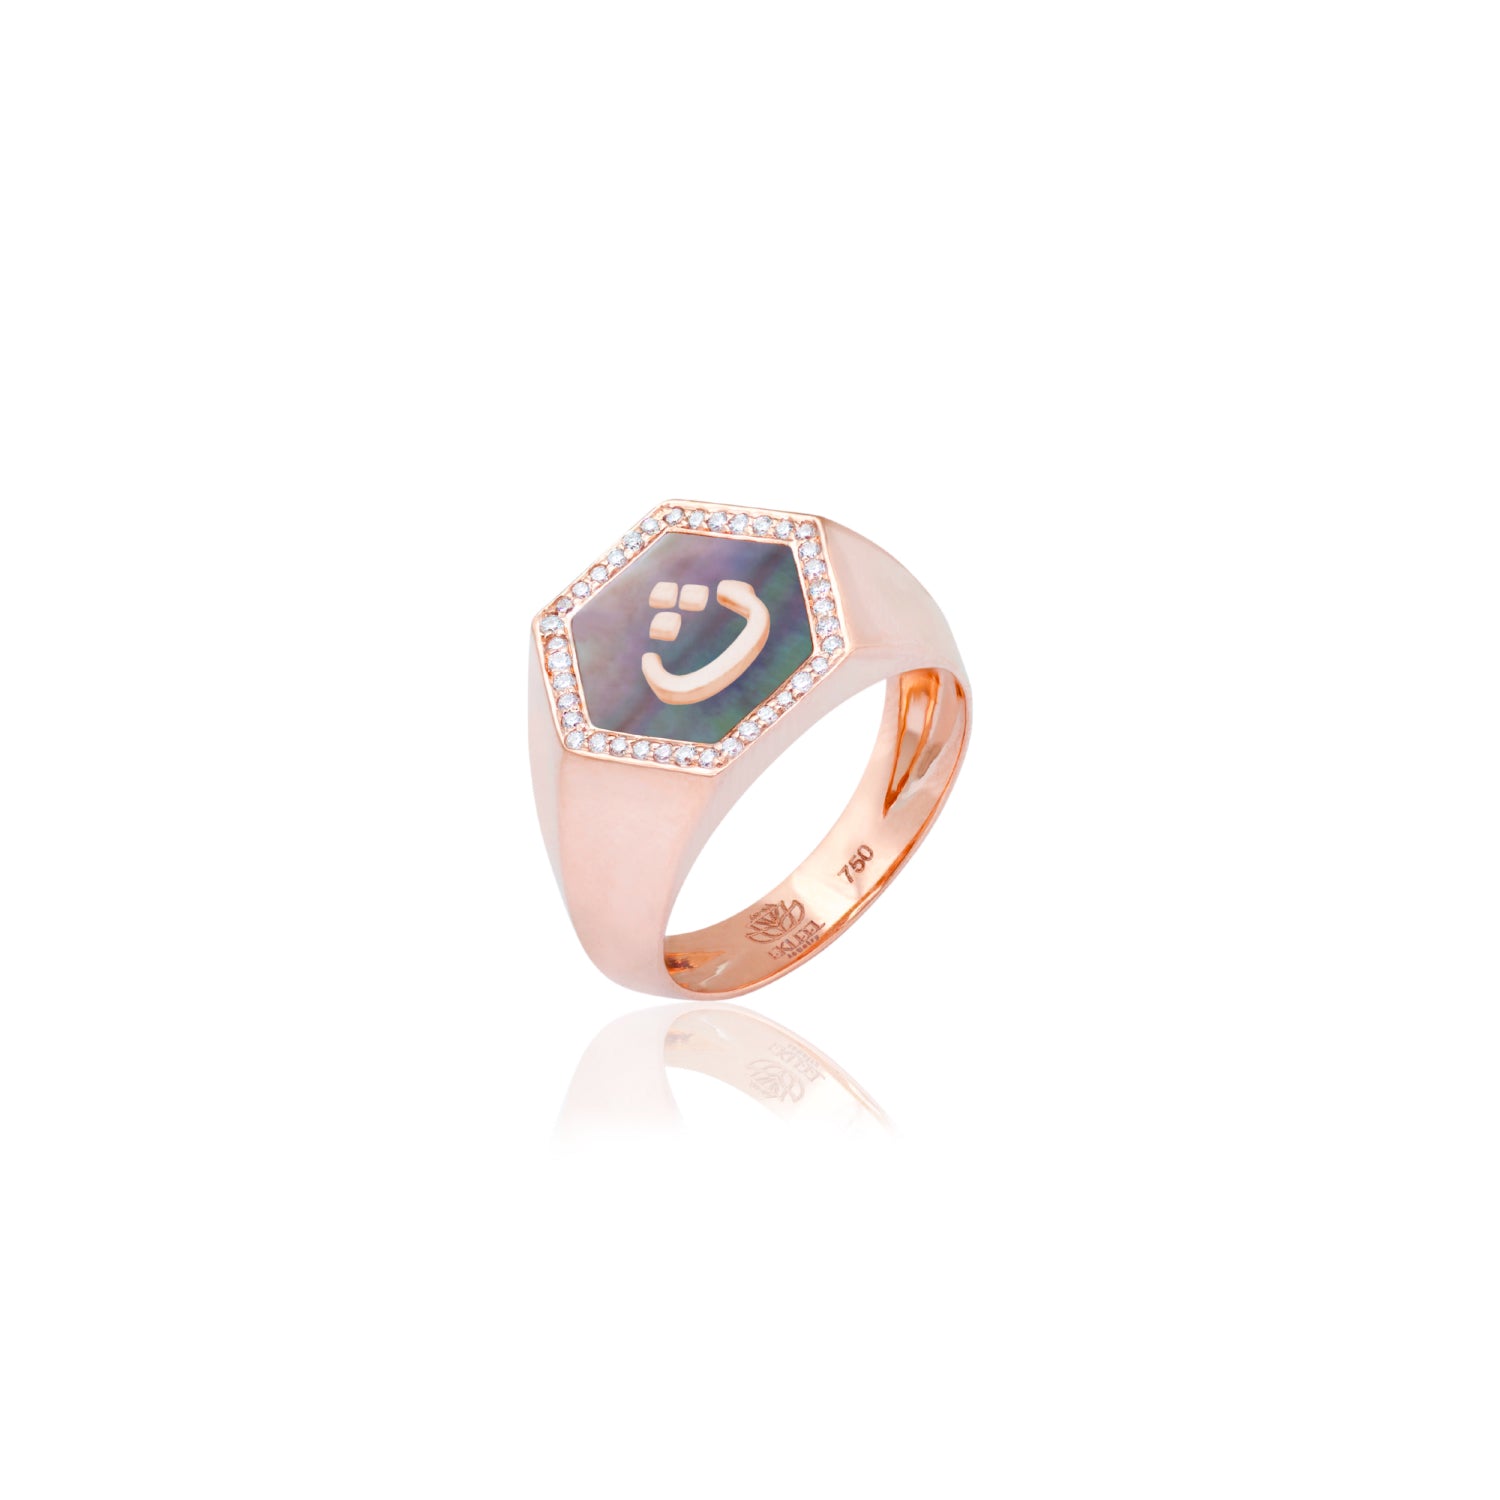 Qamoos 2.0 Letter ث Black Mother of Pearl and Diamond Signet Ring in Rose Gold